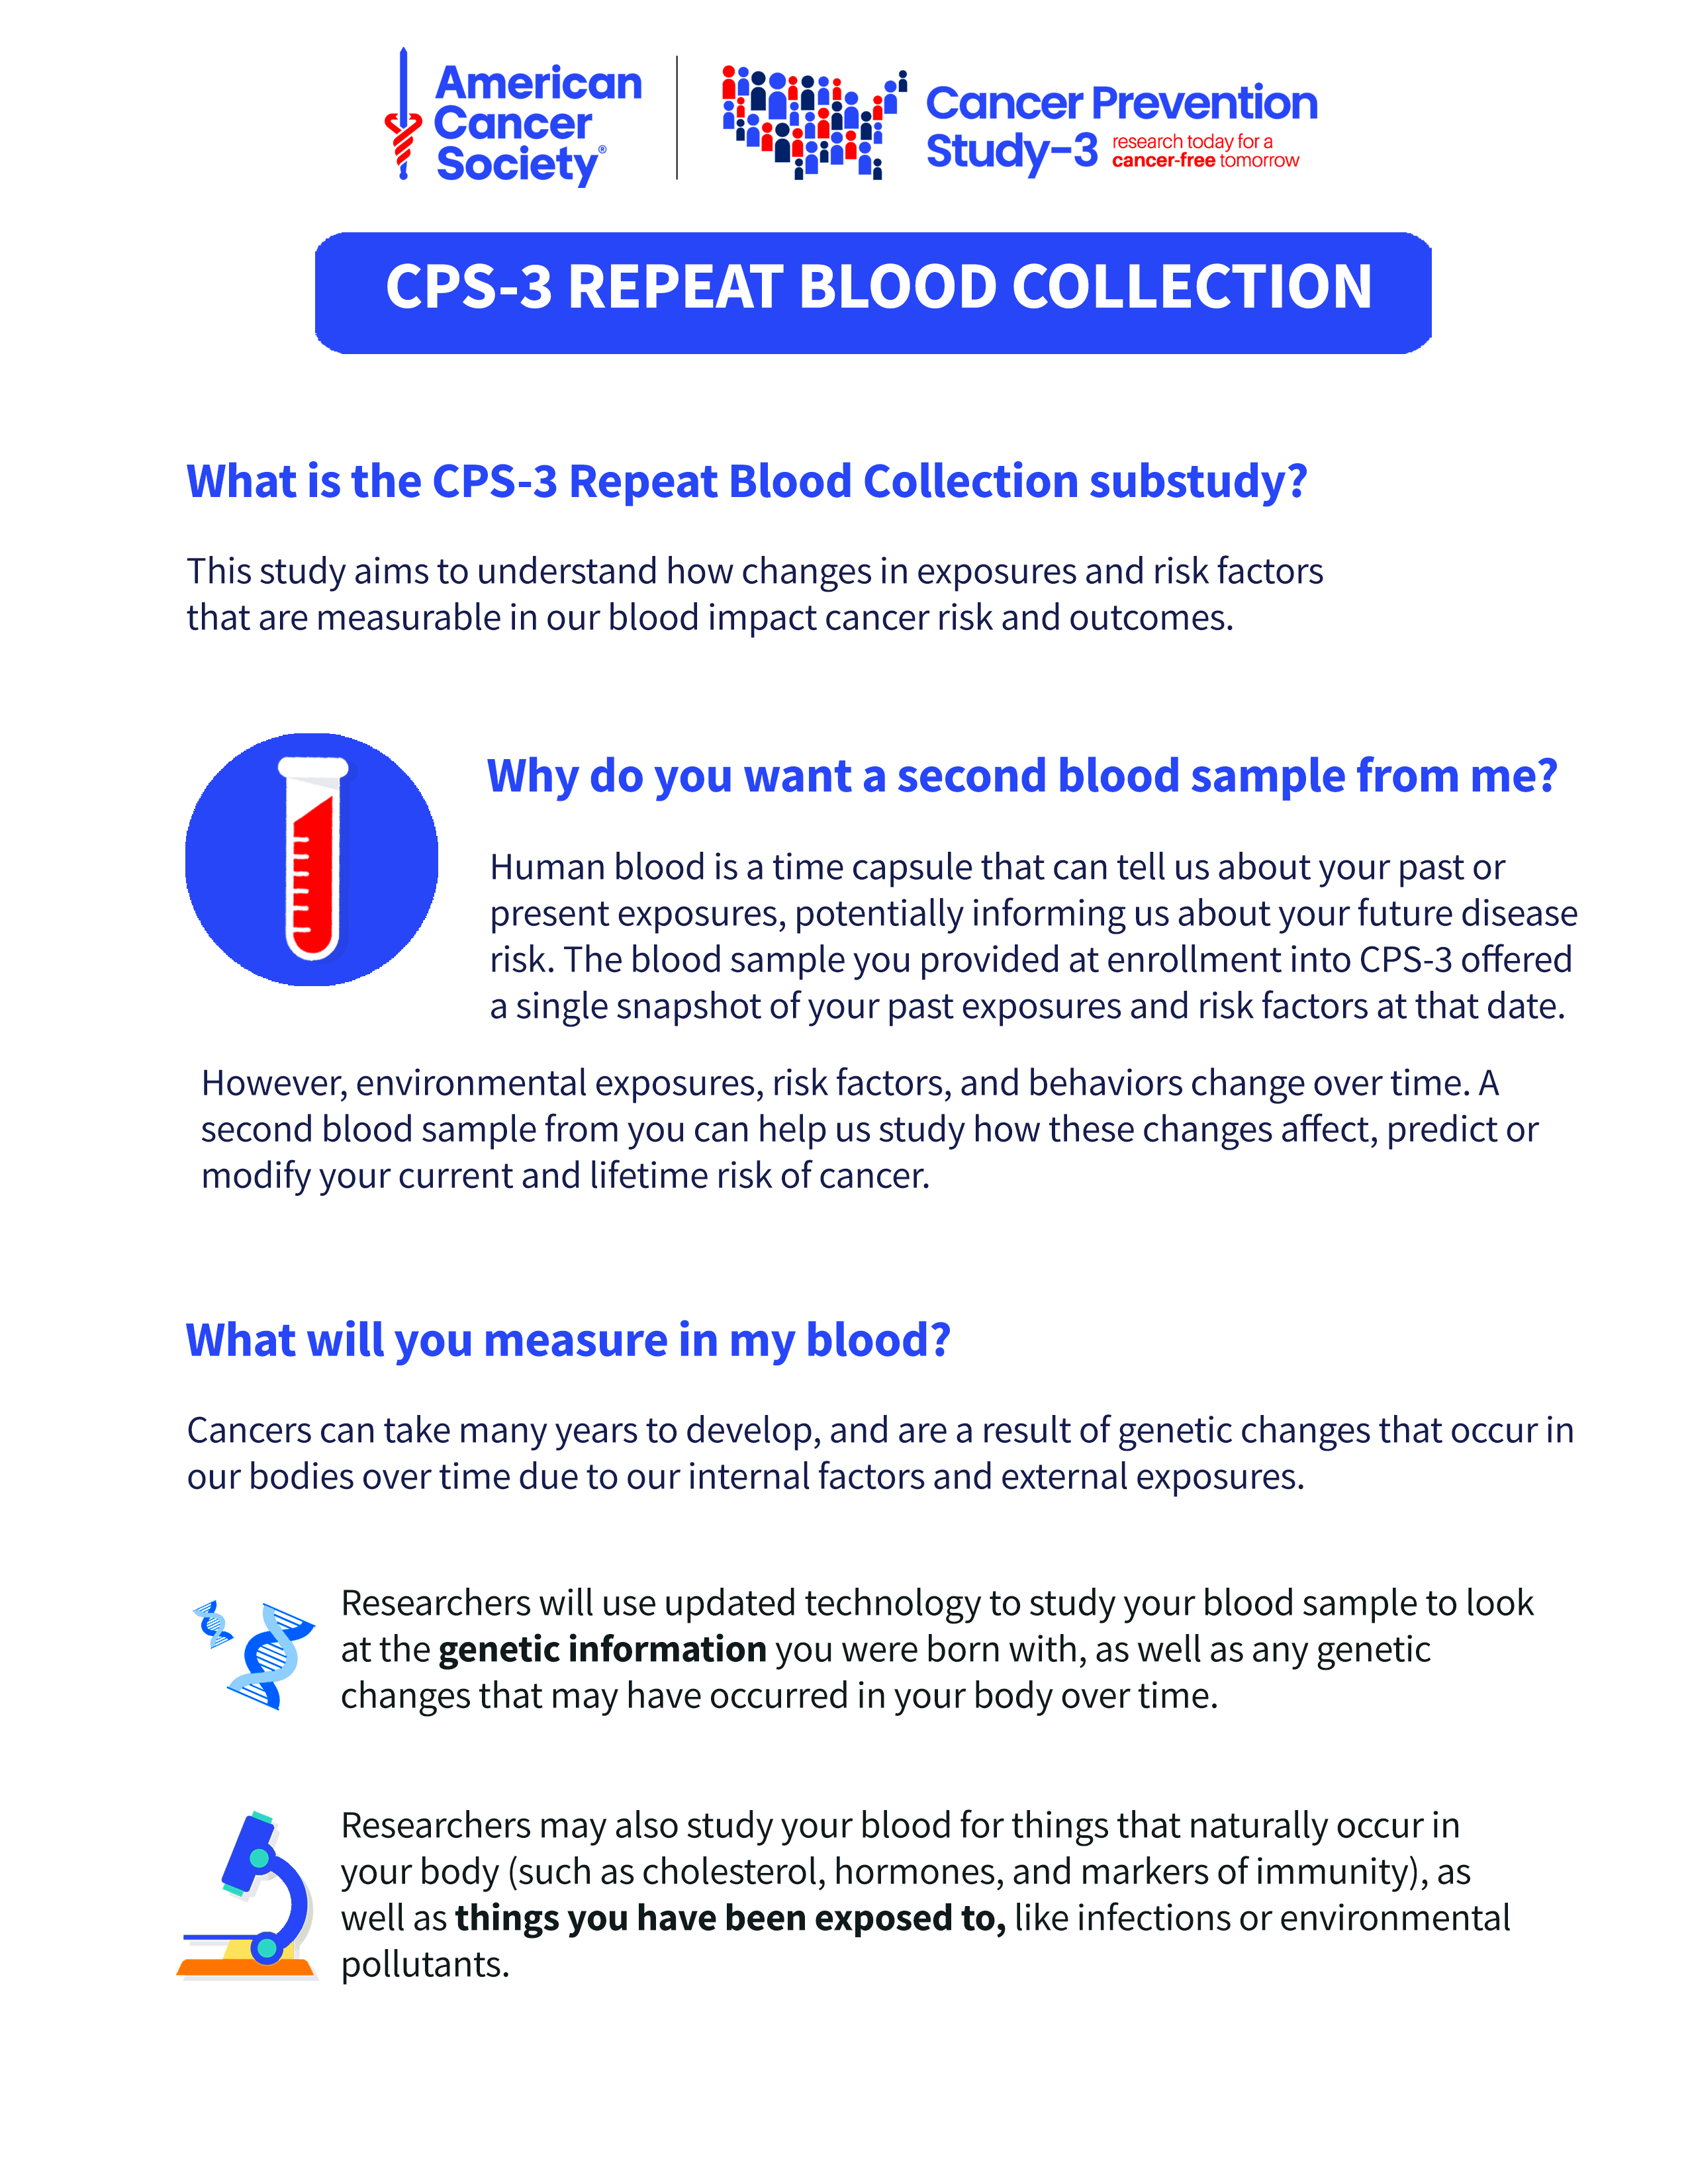 Infographic overview of the CPS-3 Repeat Blood Collection Substudy